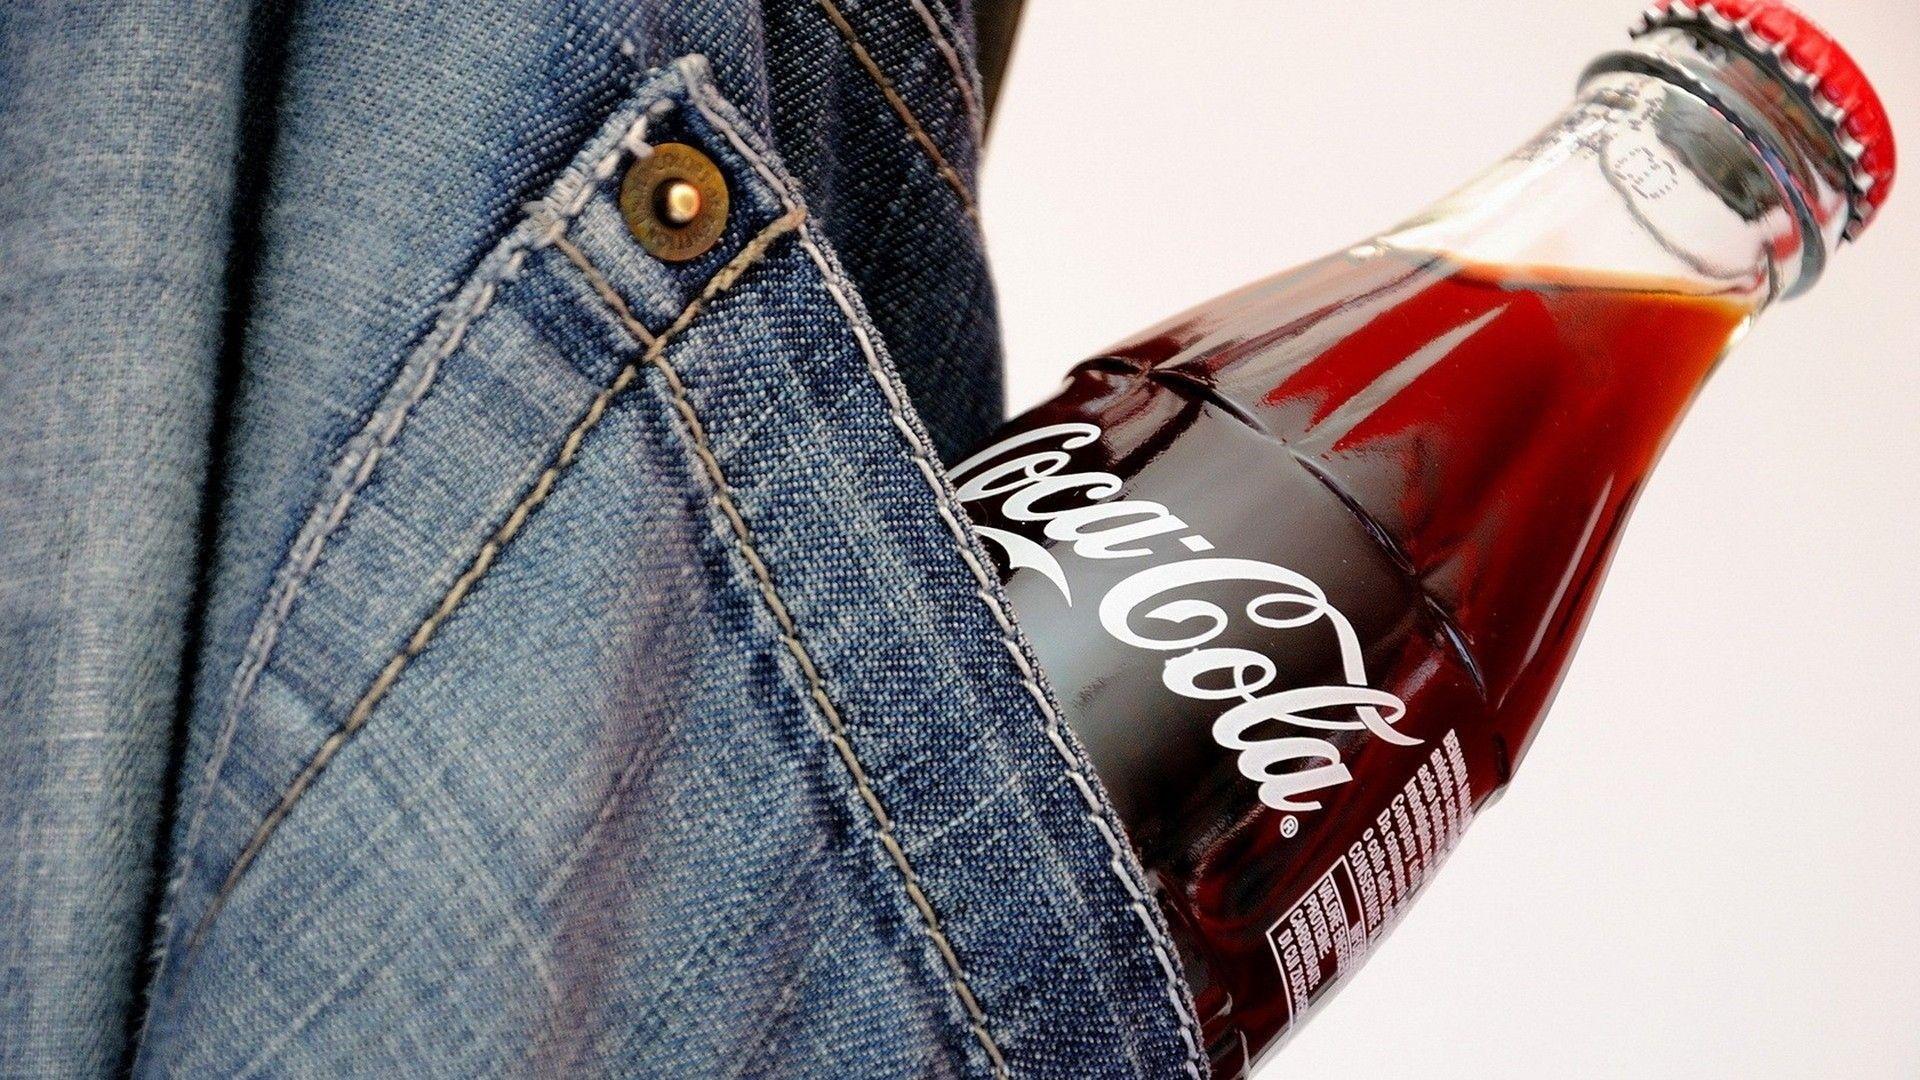 Coke bottle in the pocket of jeans wallpaper and image